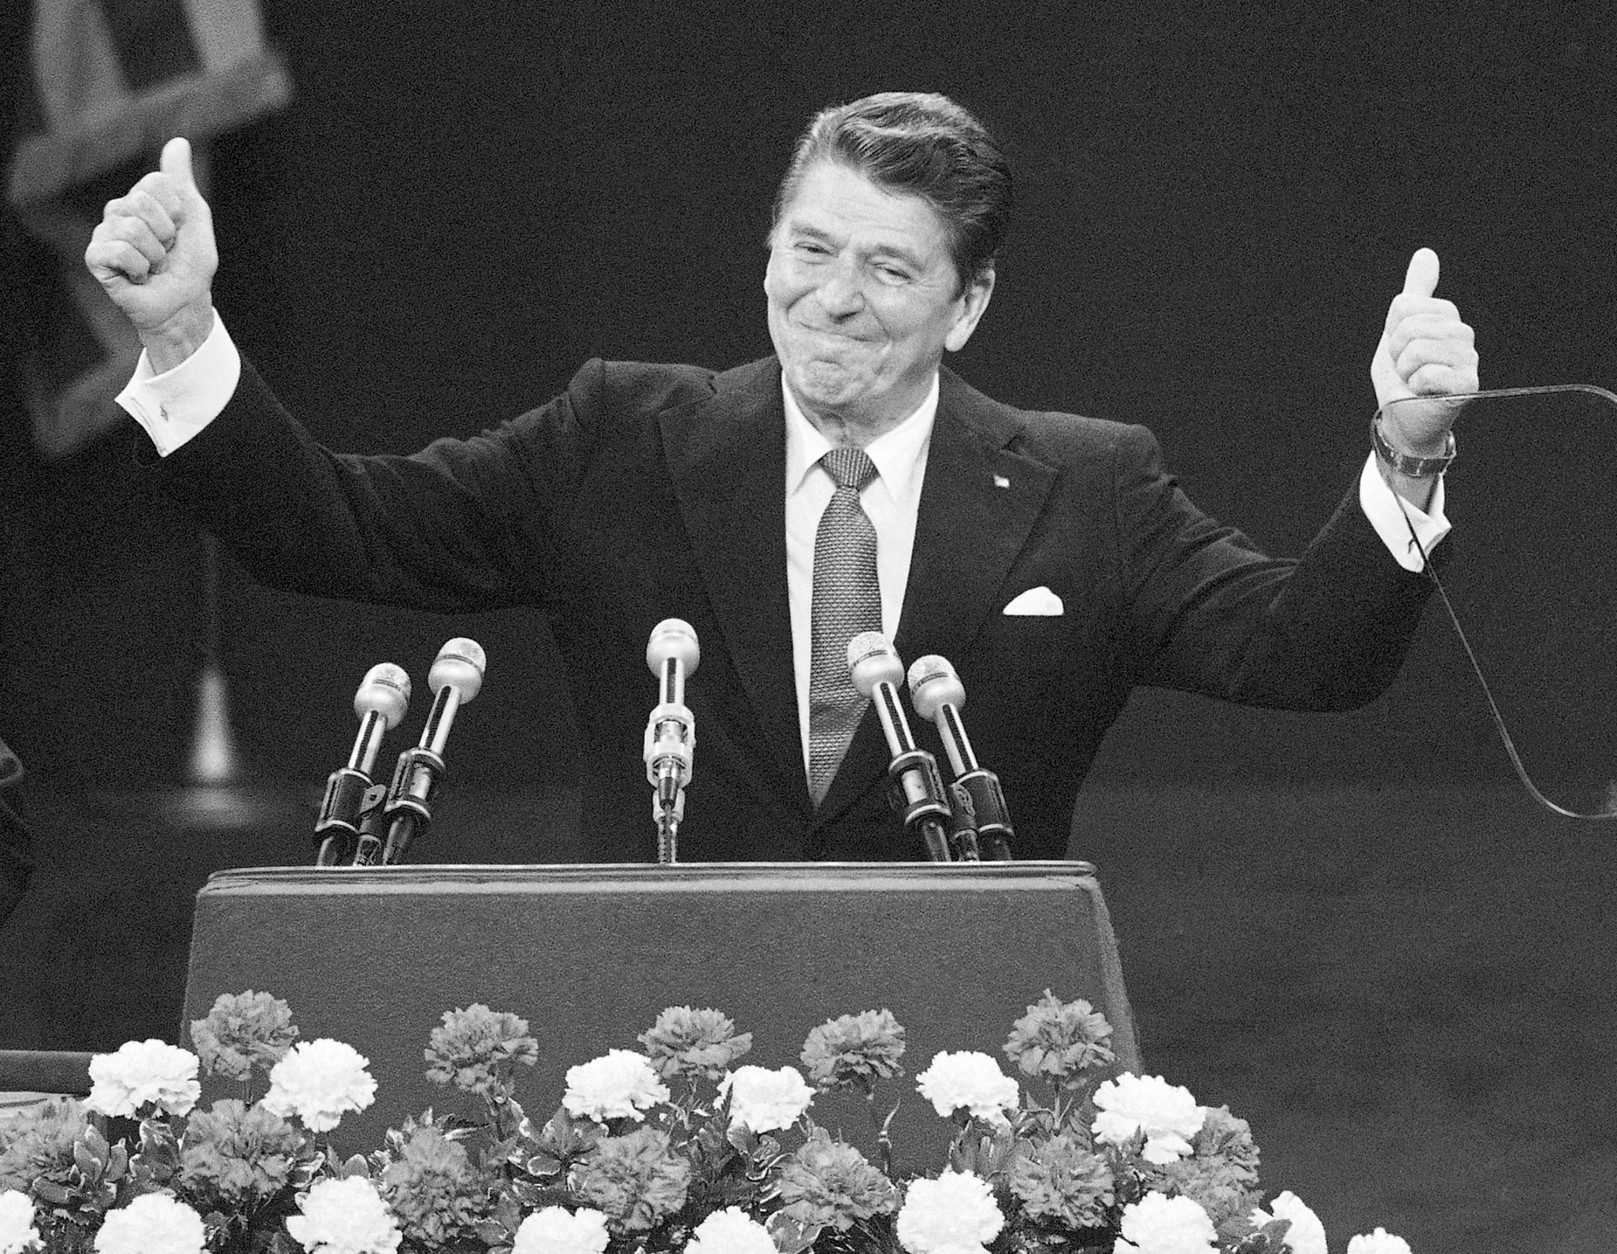 FILE - In this July 17, 1980, file photo, Republican presidential candidate Ronald Reagan stands before a cheering Republican National Convention in Detroit's Joe Louis Arena. Republicans heading to their 2012 party convention in Tampa are eager to hear an earful about the shortcomings of President Barack Obama's record, the woeful U.S. economy and the competing visions of the two presidential candidates. They aren't looking for compromise, which most Americans say is necessary to get the nation on track. The delegates hear rhetoric that is brutal, vitriolic and far from conciliatory. The Republicans want a party like in 1980 when the GOP ousted a Democratic president after one term. (AP Photo/Rusty Kennedy, File)